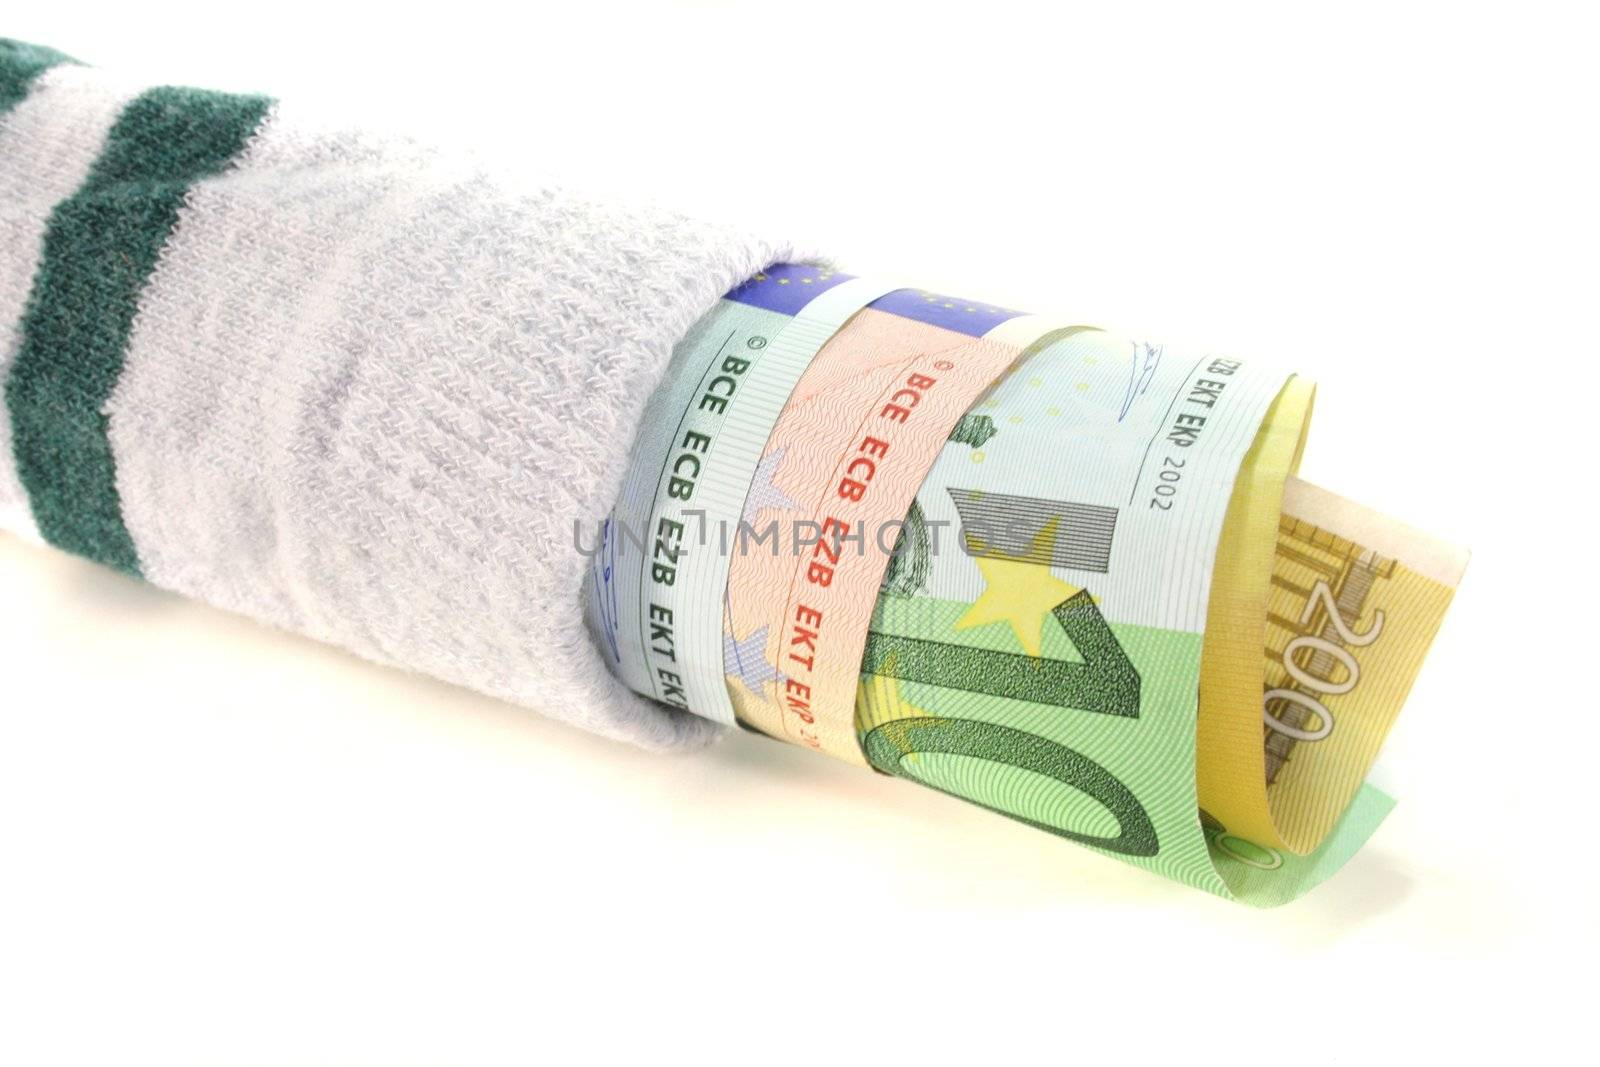 Striped money sock with many euro notes on a white background